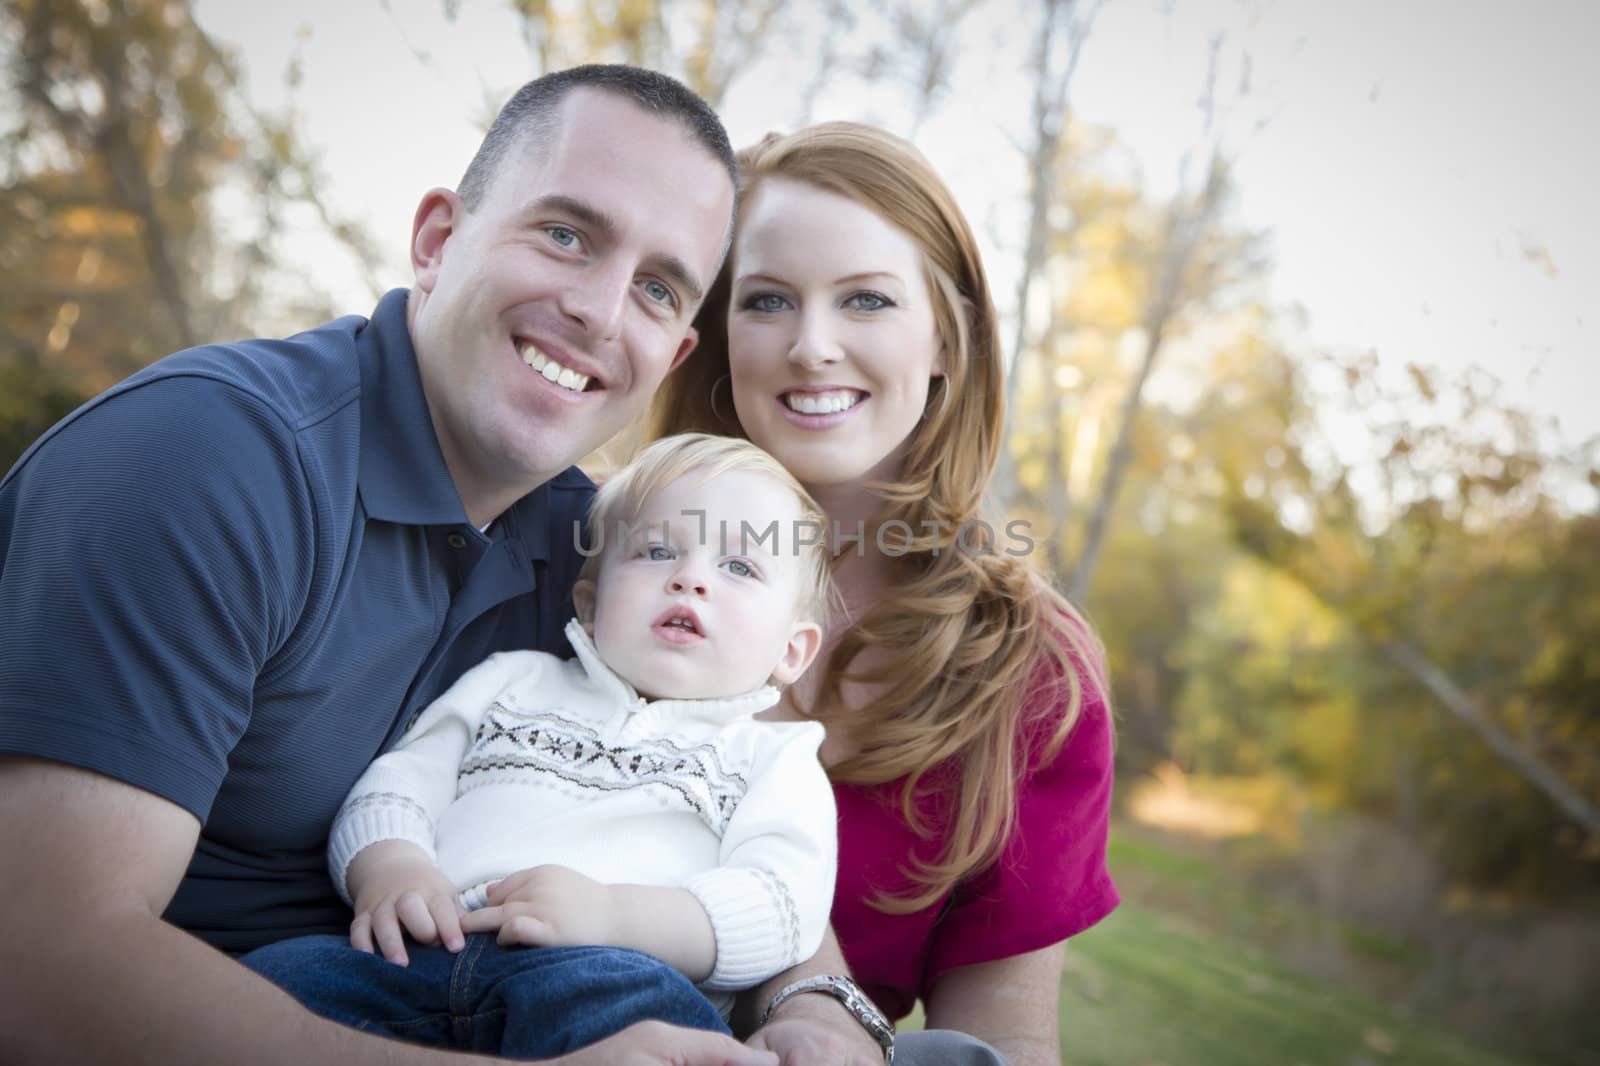 Young Attractive Parents and Child Portrait Outdoors at a Park.